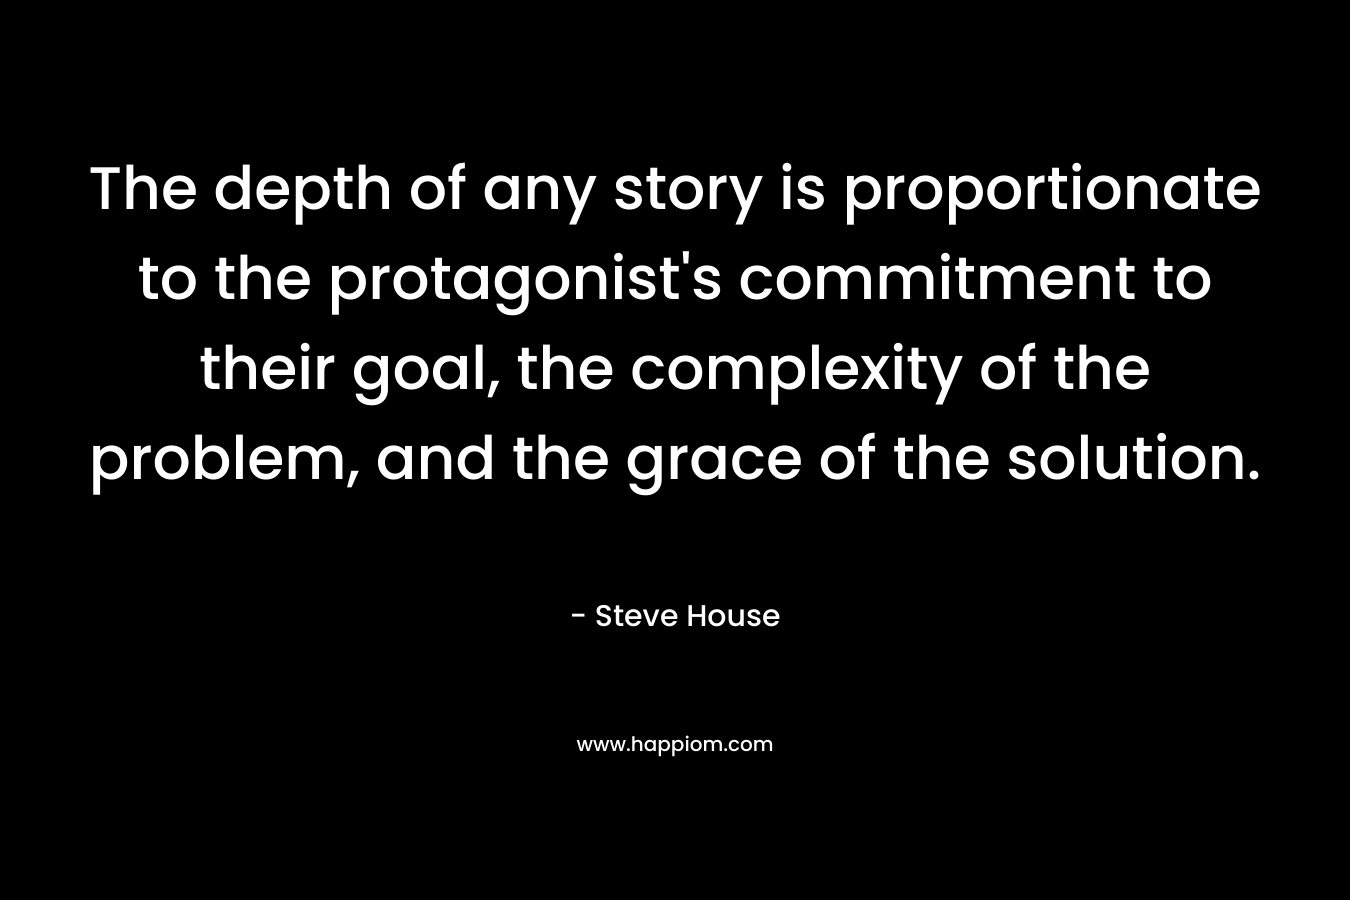 The depth of any story is proportionate to the protagonist's commitment to their goal, the complexity of the problem, and the grace of the solution.